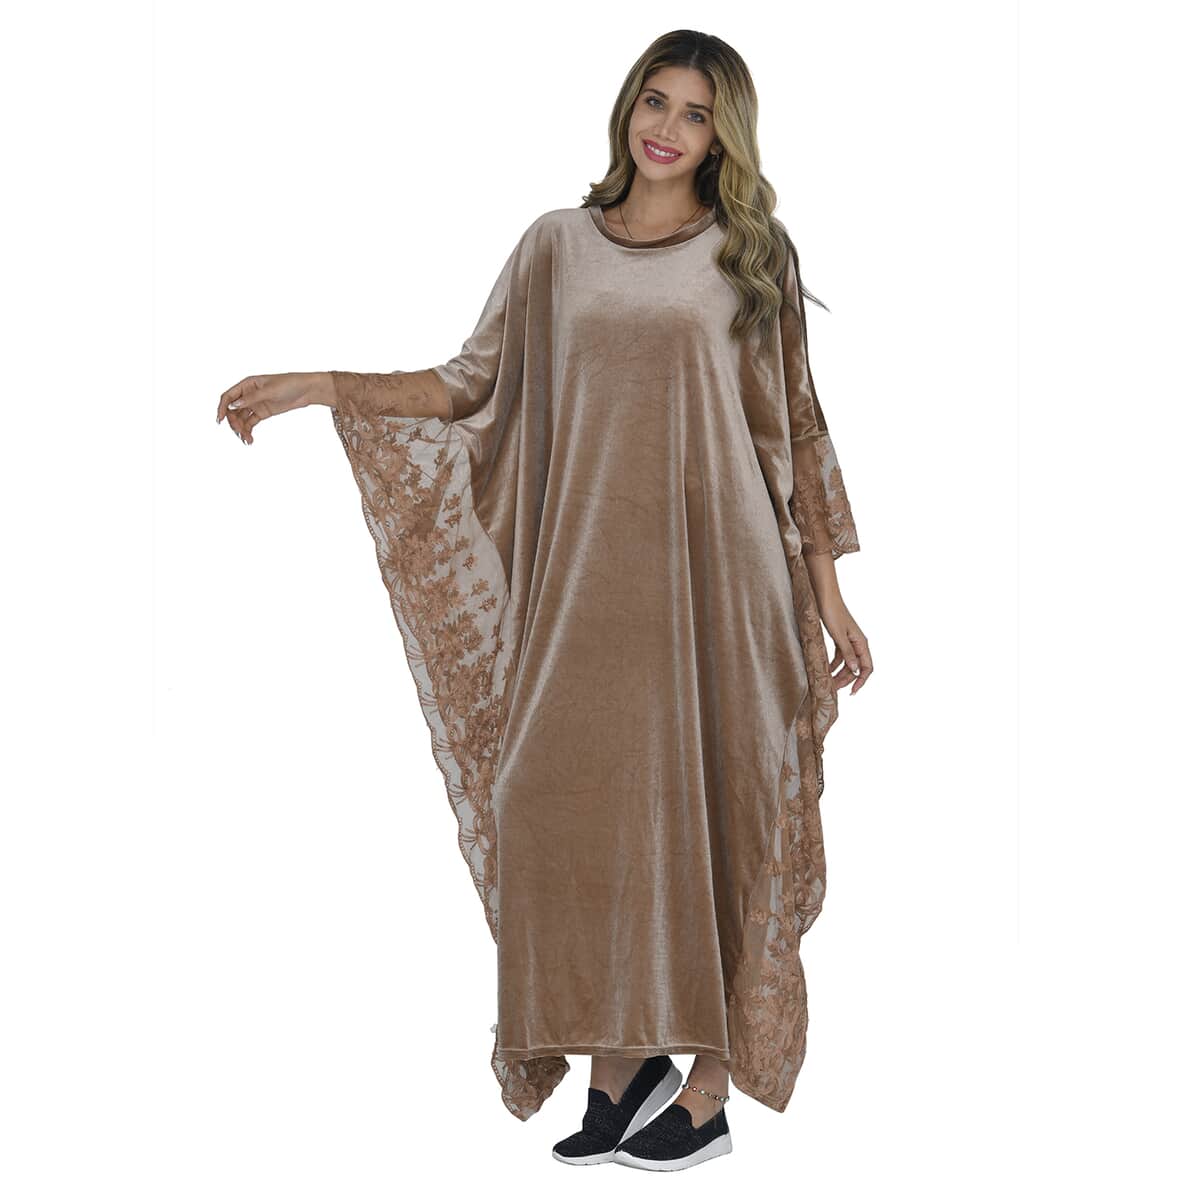 Tamsy Black Label - Lux Stretch Velvet Kaftan with Lace in Caramel - One Size Fits Most image number 3